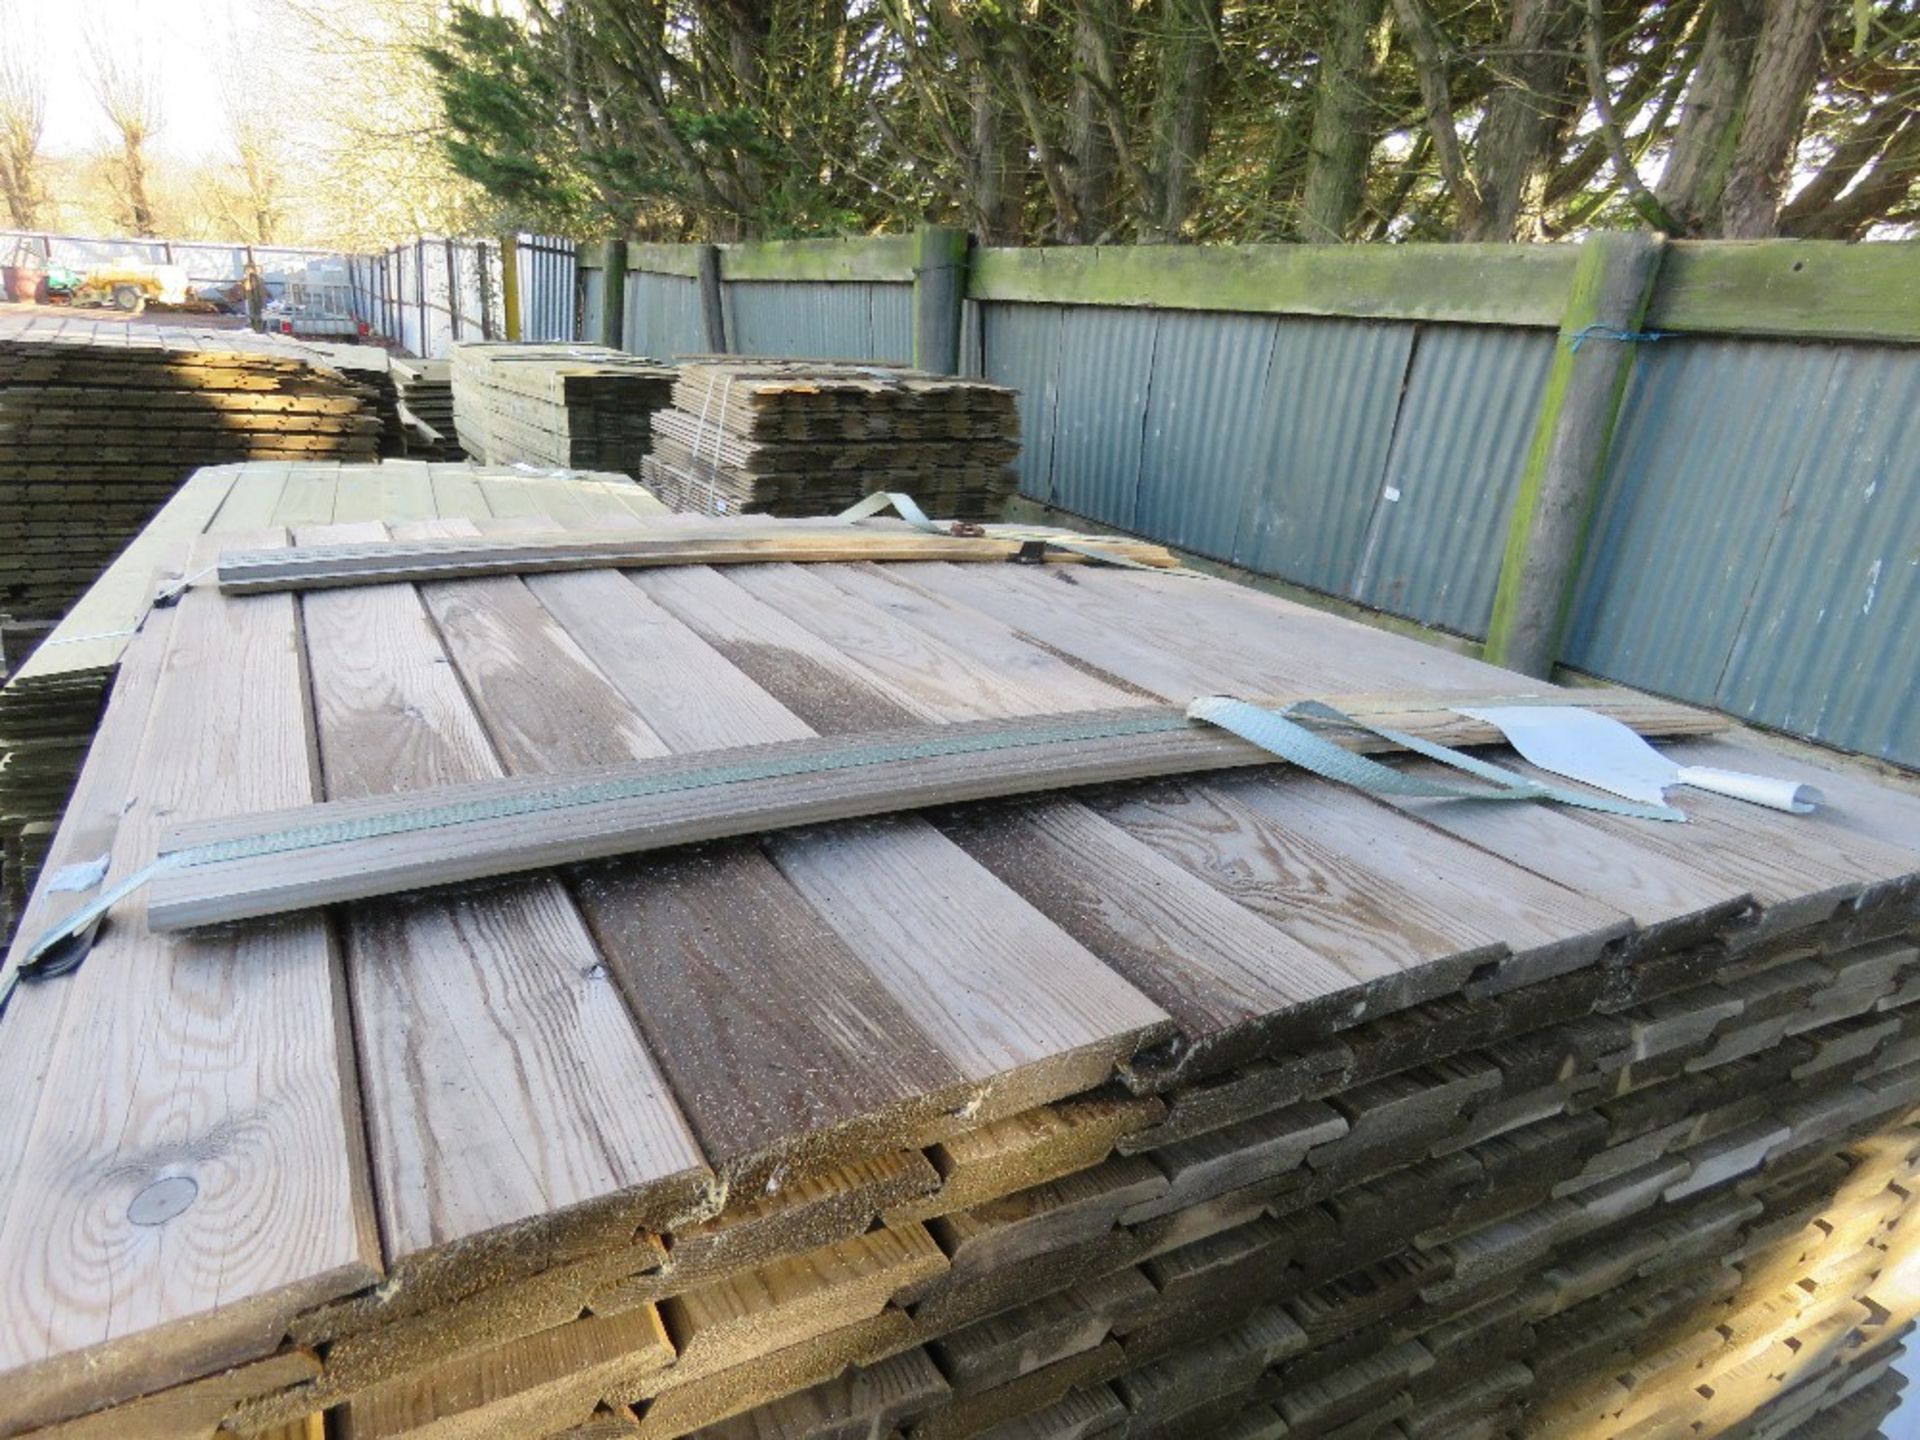 2 X PALLETS OF SHIPLAP PRESSURE TREATED FENCE CLADDING TIMBER BOARDS. 1.02M LENGTH X 95MM WIDTH APP - Image 4 of 4